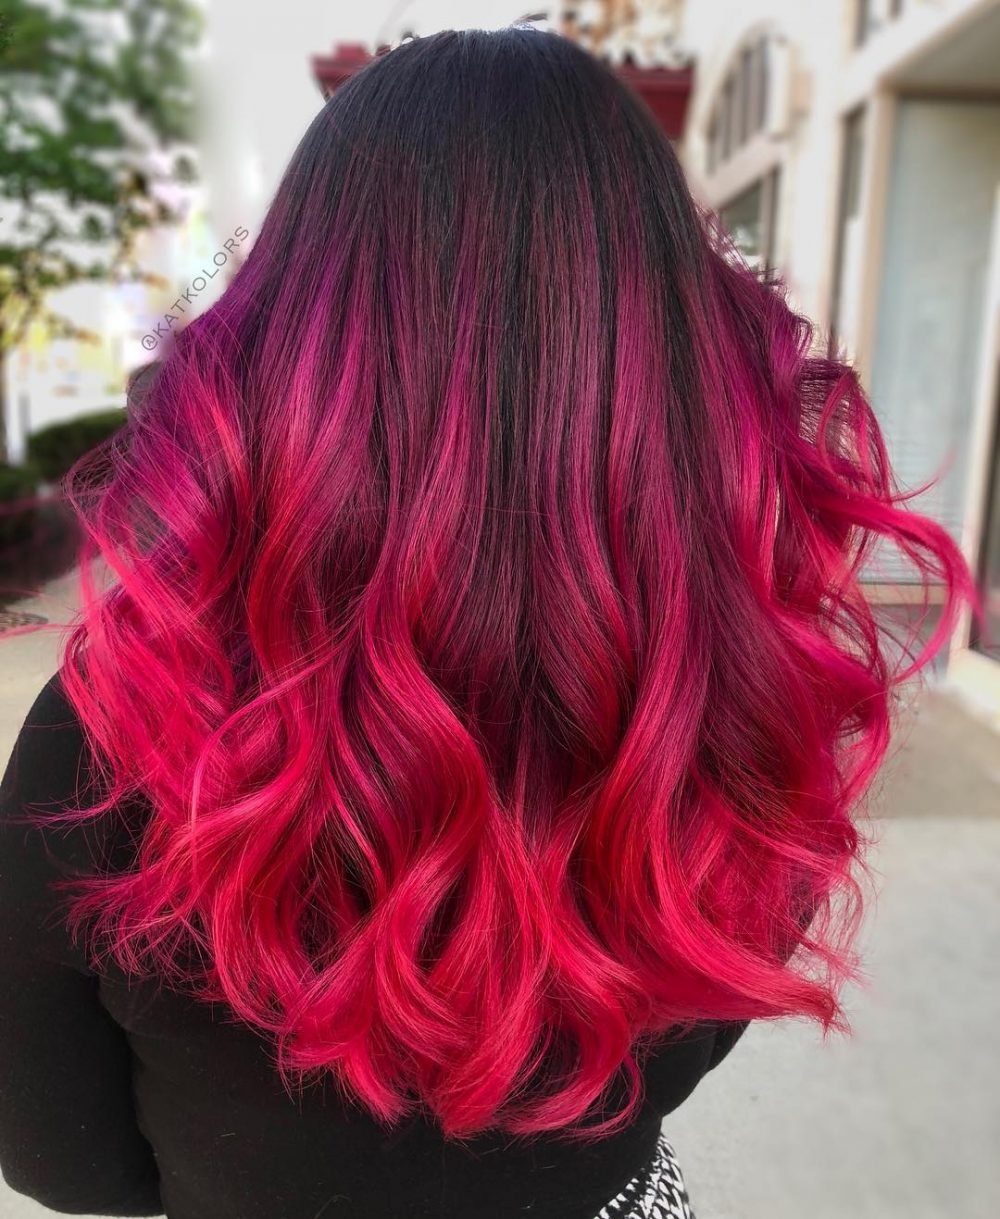 How To Get Pink OmbrÃ£Â© Hair - 22 Cute Ideas For 2023